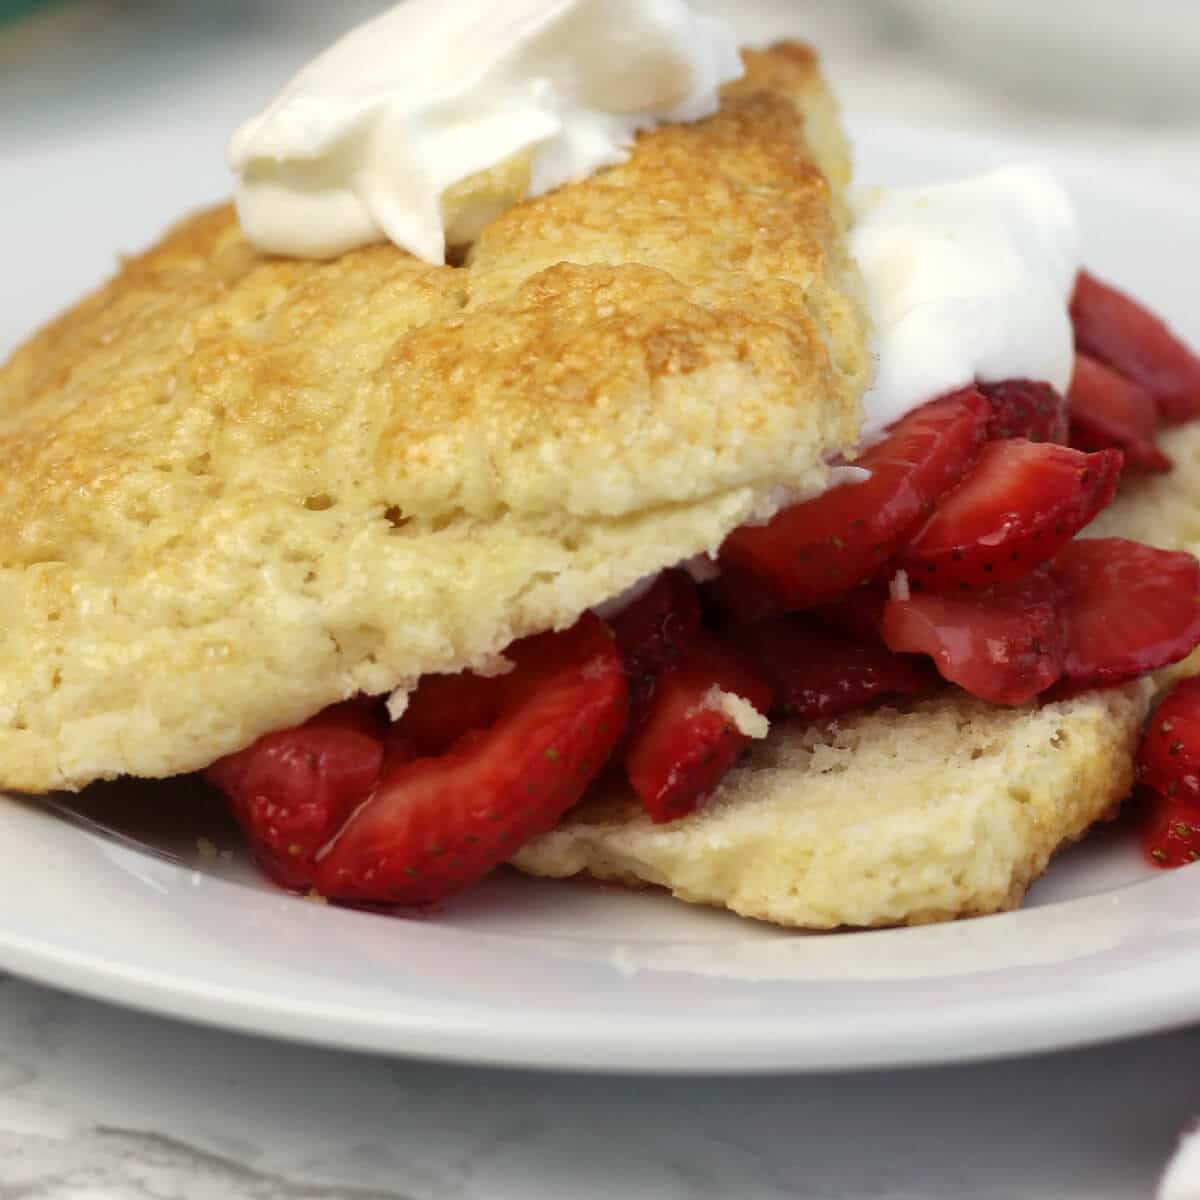 Strawberry shortcake recipe with easy, homemade biscuits using cream and brown sugar.